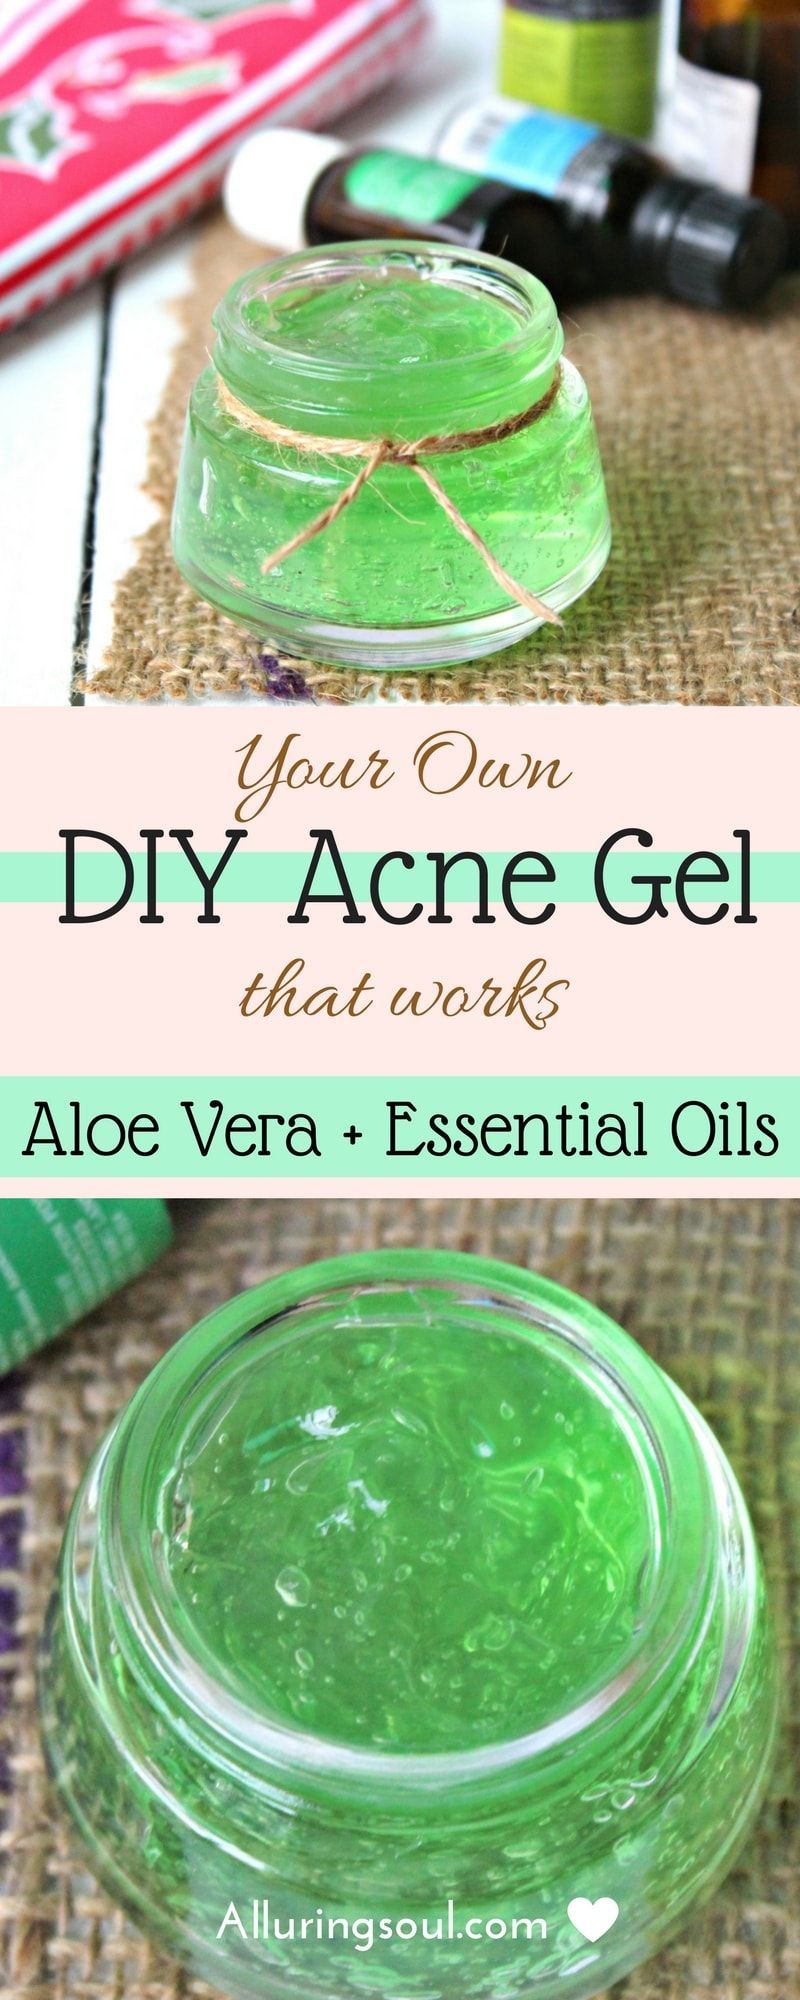 Your Own DIY Acne Gel That Works | Alluring Soul - Your Own DIY Acne Gel That Works | Alluring Soul -   18 diy Beauty nails ideas